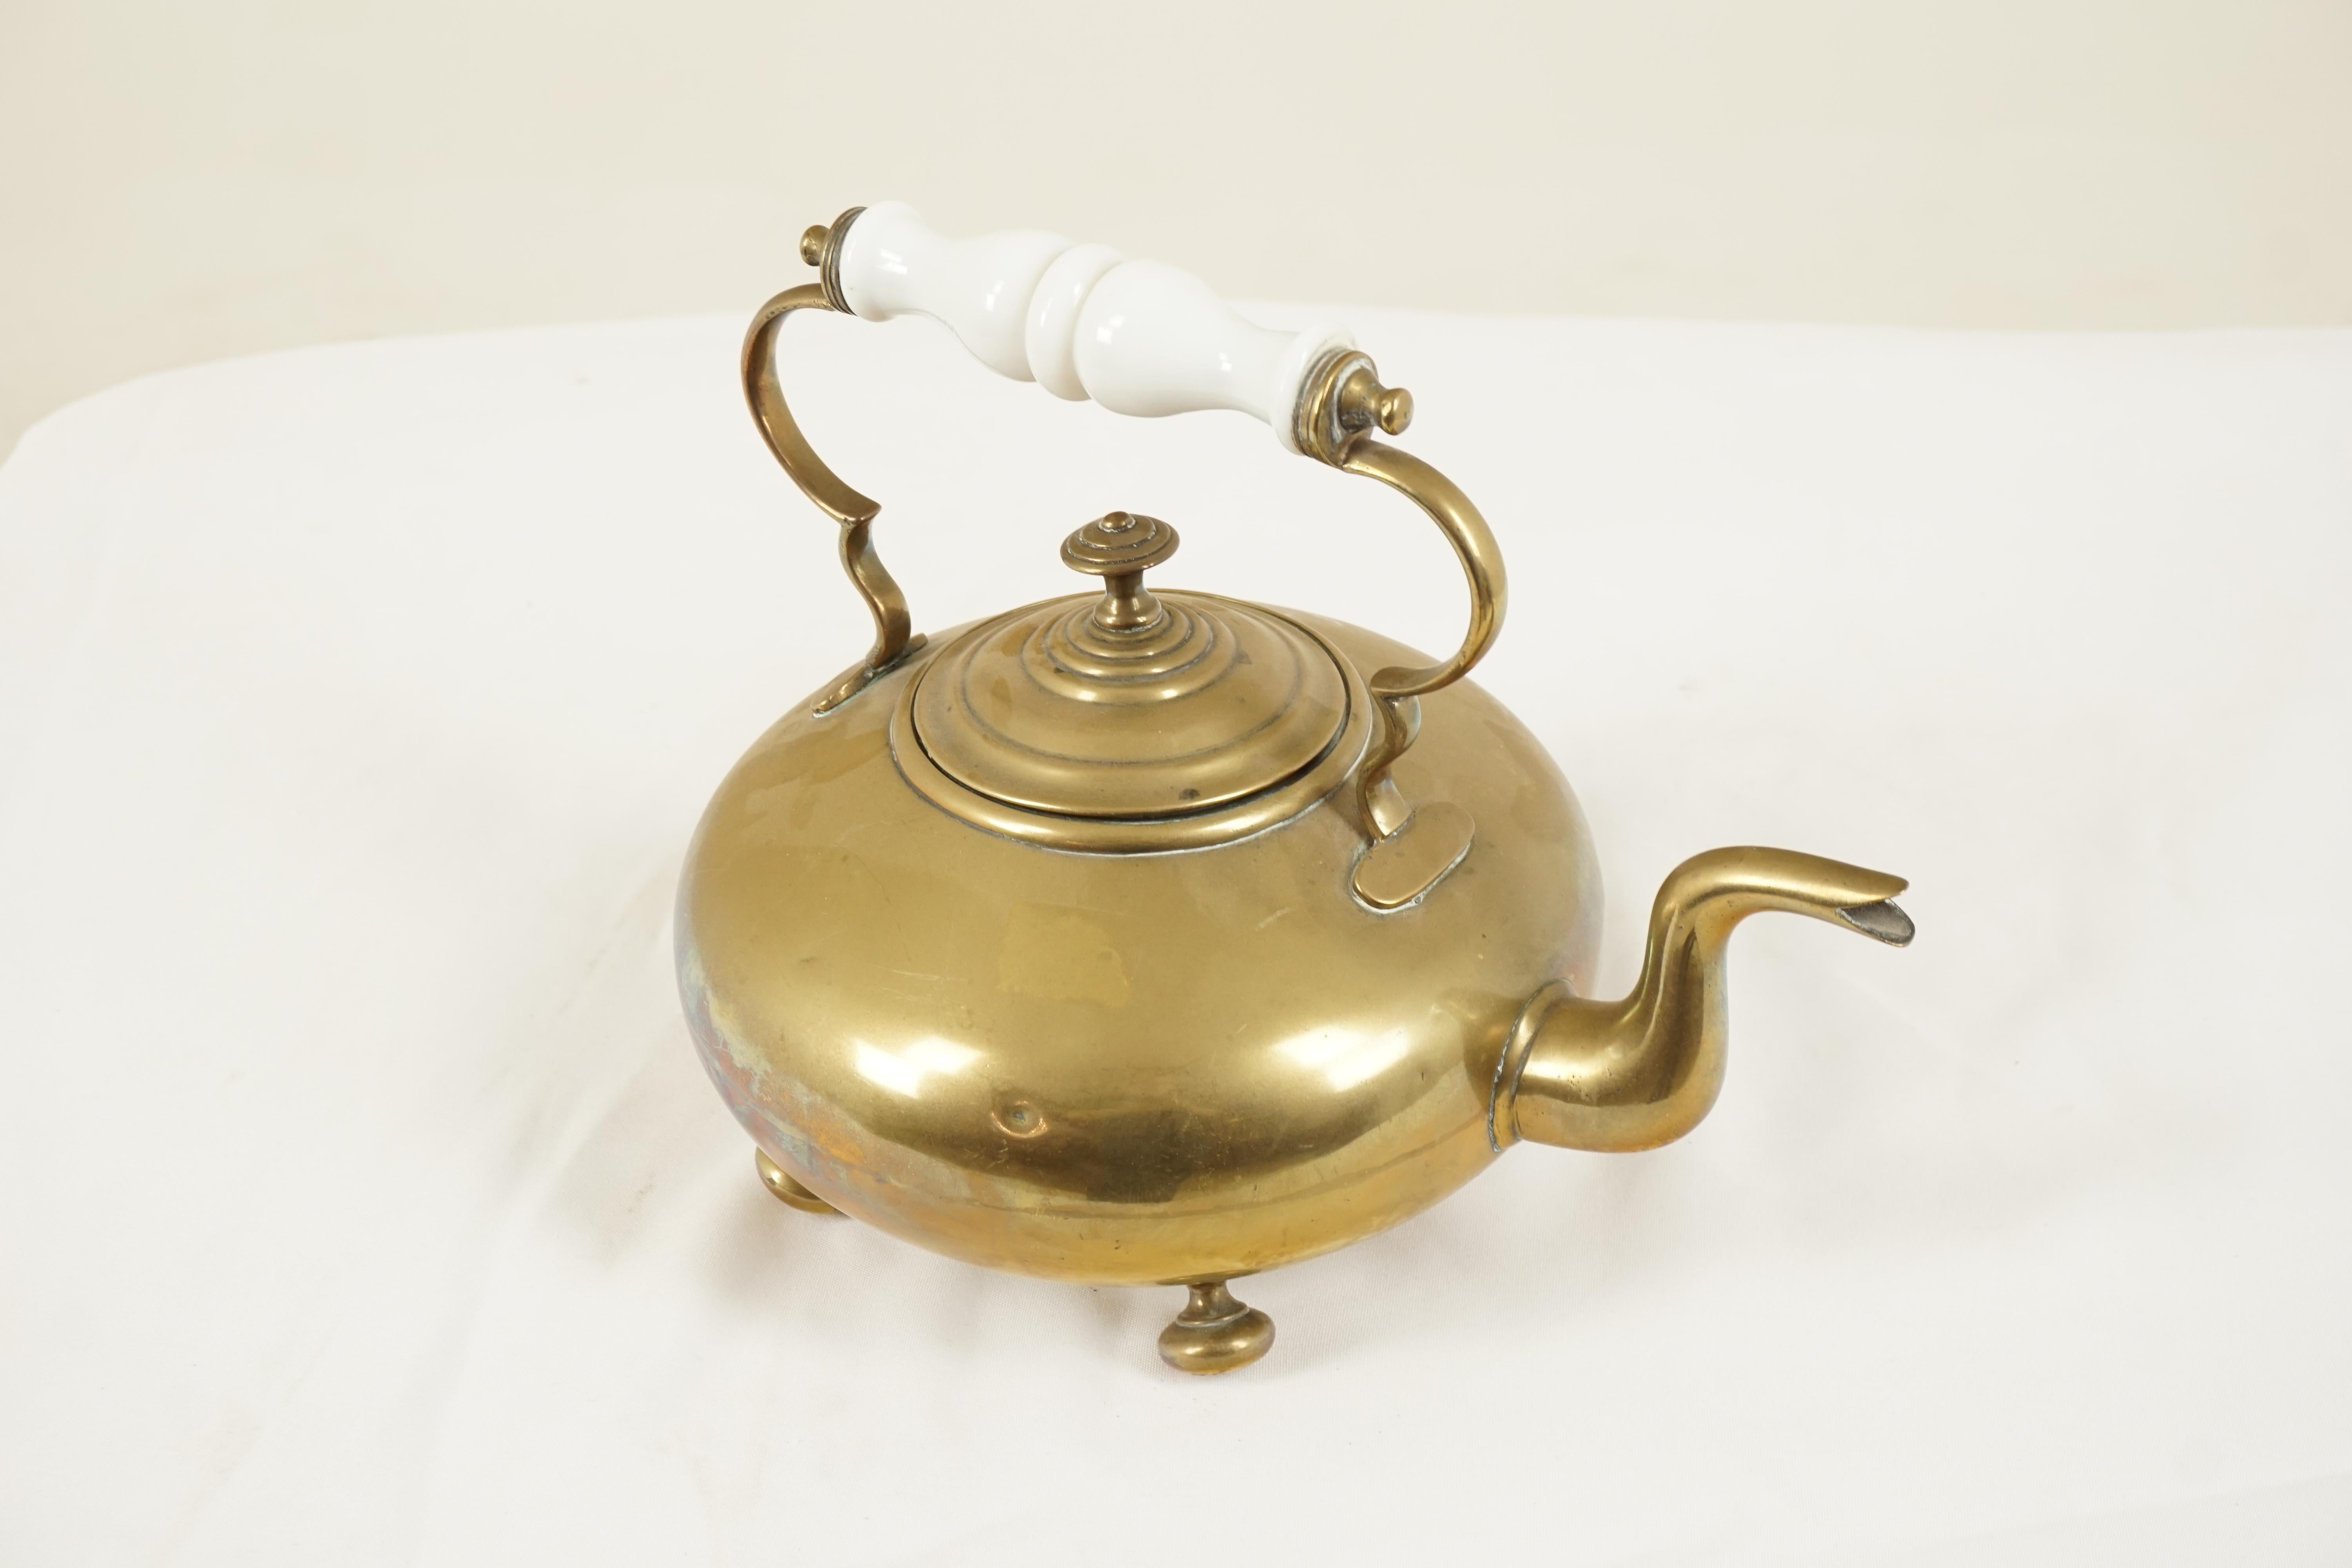 Antique Victorian brass toddy kettle, milk glass handle, Scotland 1880, B74y

Scotland 1880
Solid brass
Elegant shaped milk glass handle
Circular body and classic spout
Inside kettle has a tin lining
The kettle stands on four turned brass